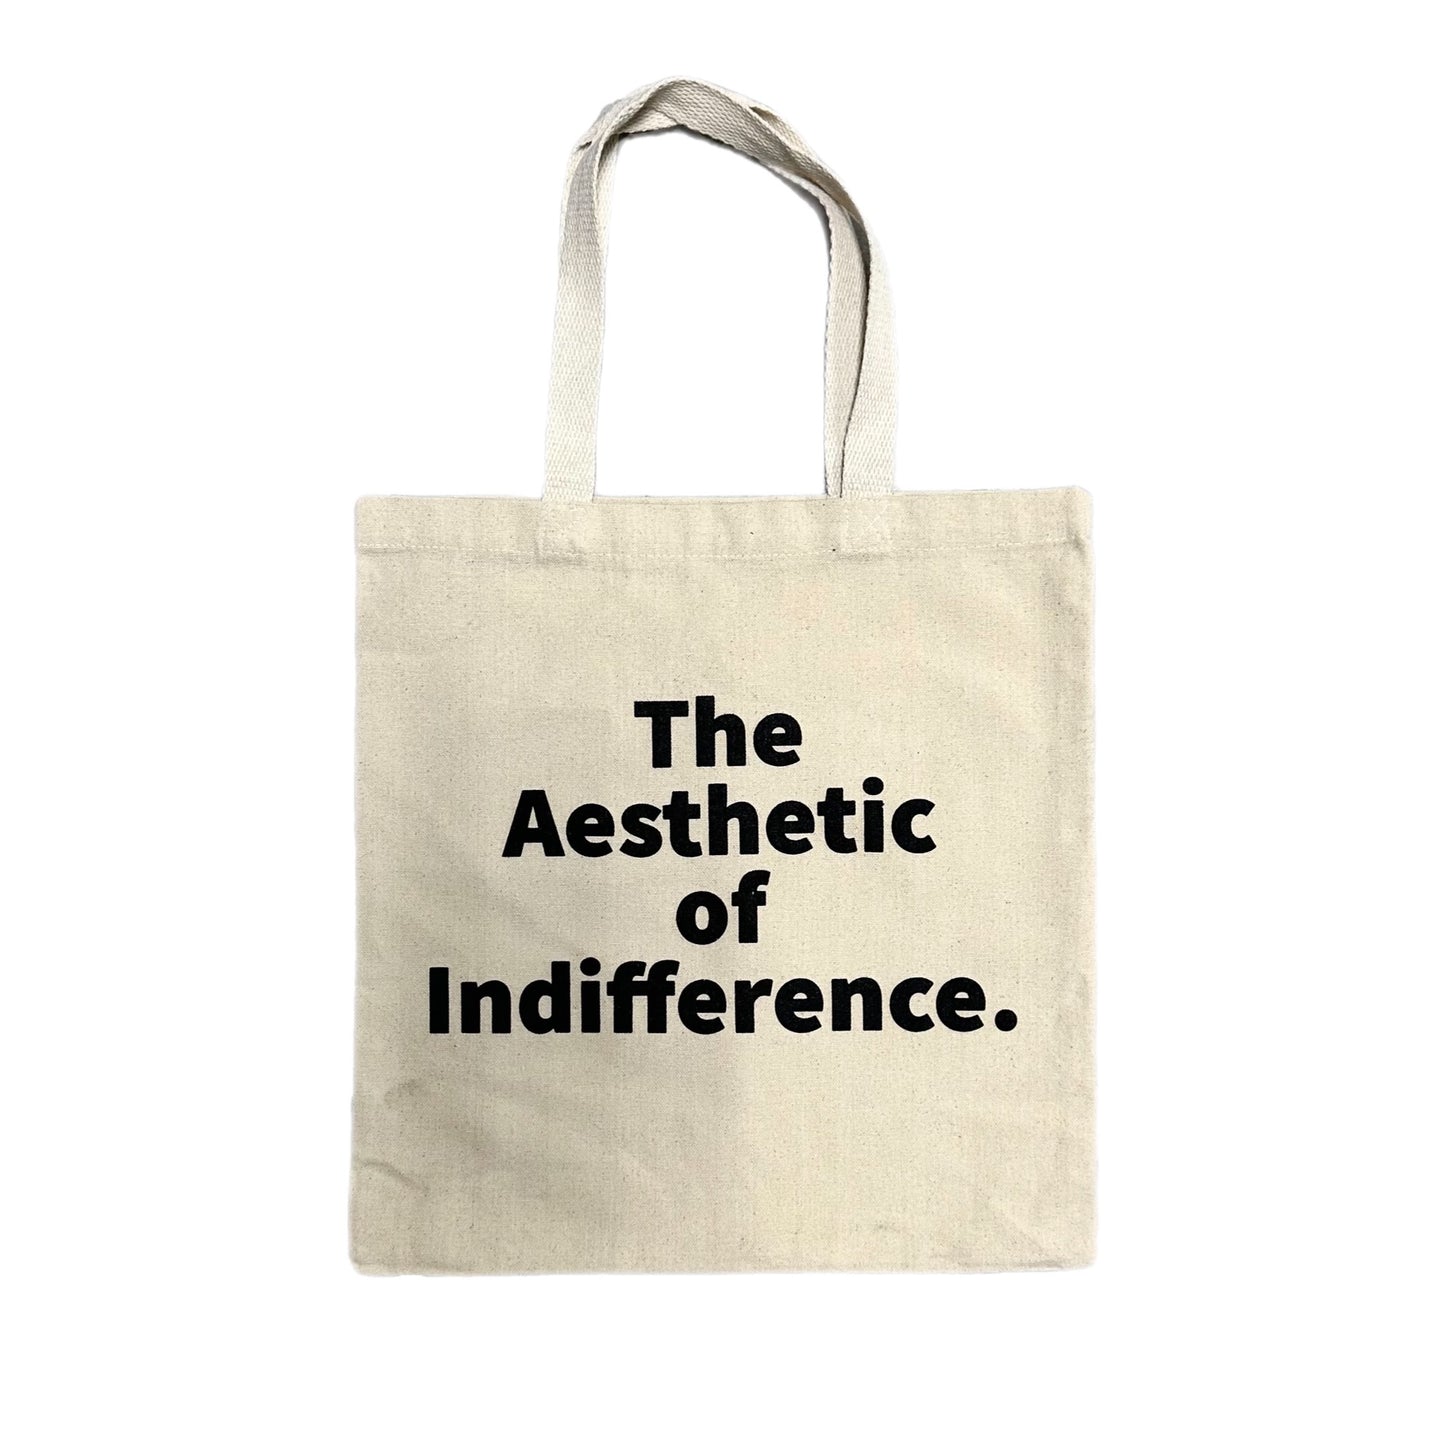 Gallery Dept. Indifference Tote Bag